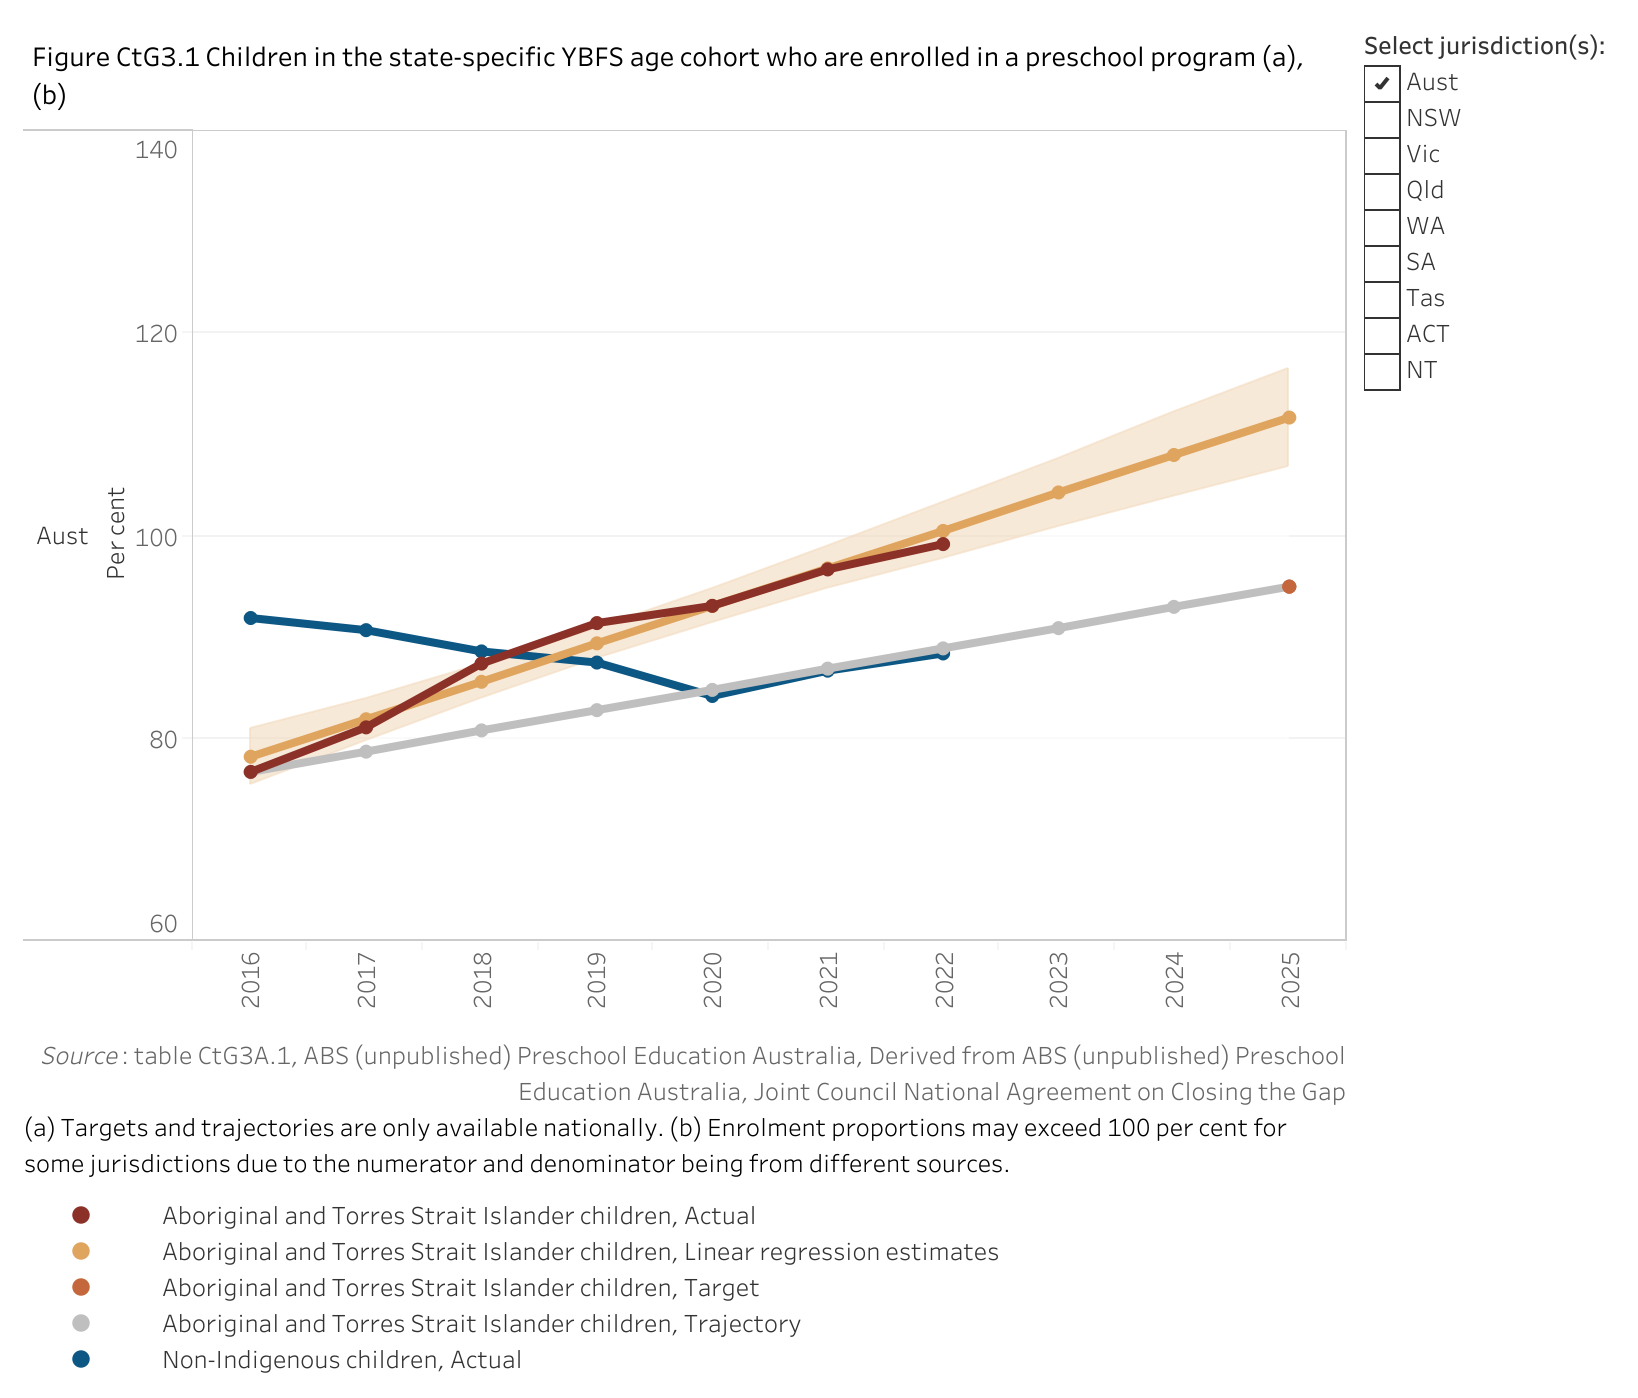 Figure CtG3.1 shows children in the state-specific Year Before Full time Schooling age cohort who are enrolled in a preschool program. More details can be found within the text near this image.